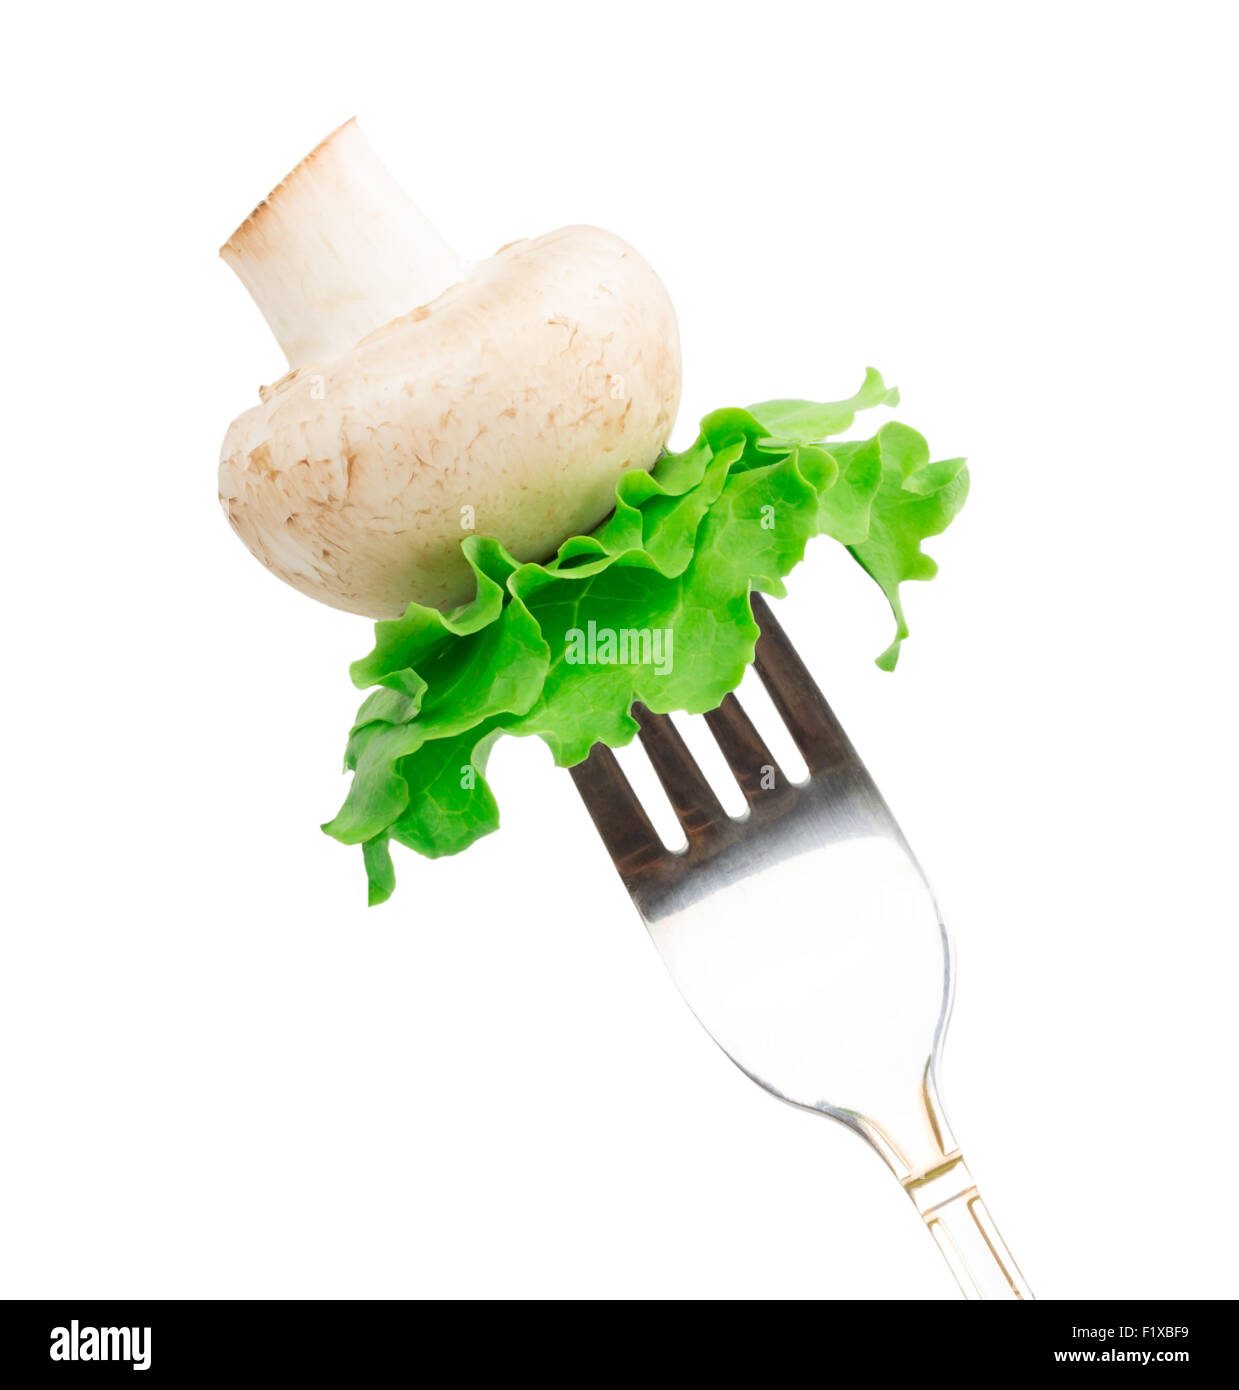 mushroom and leaves of green salad on a fork Isolated on white background. Stock Photo